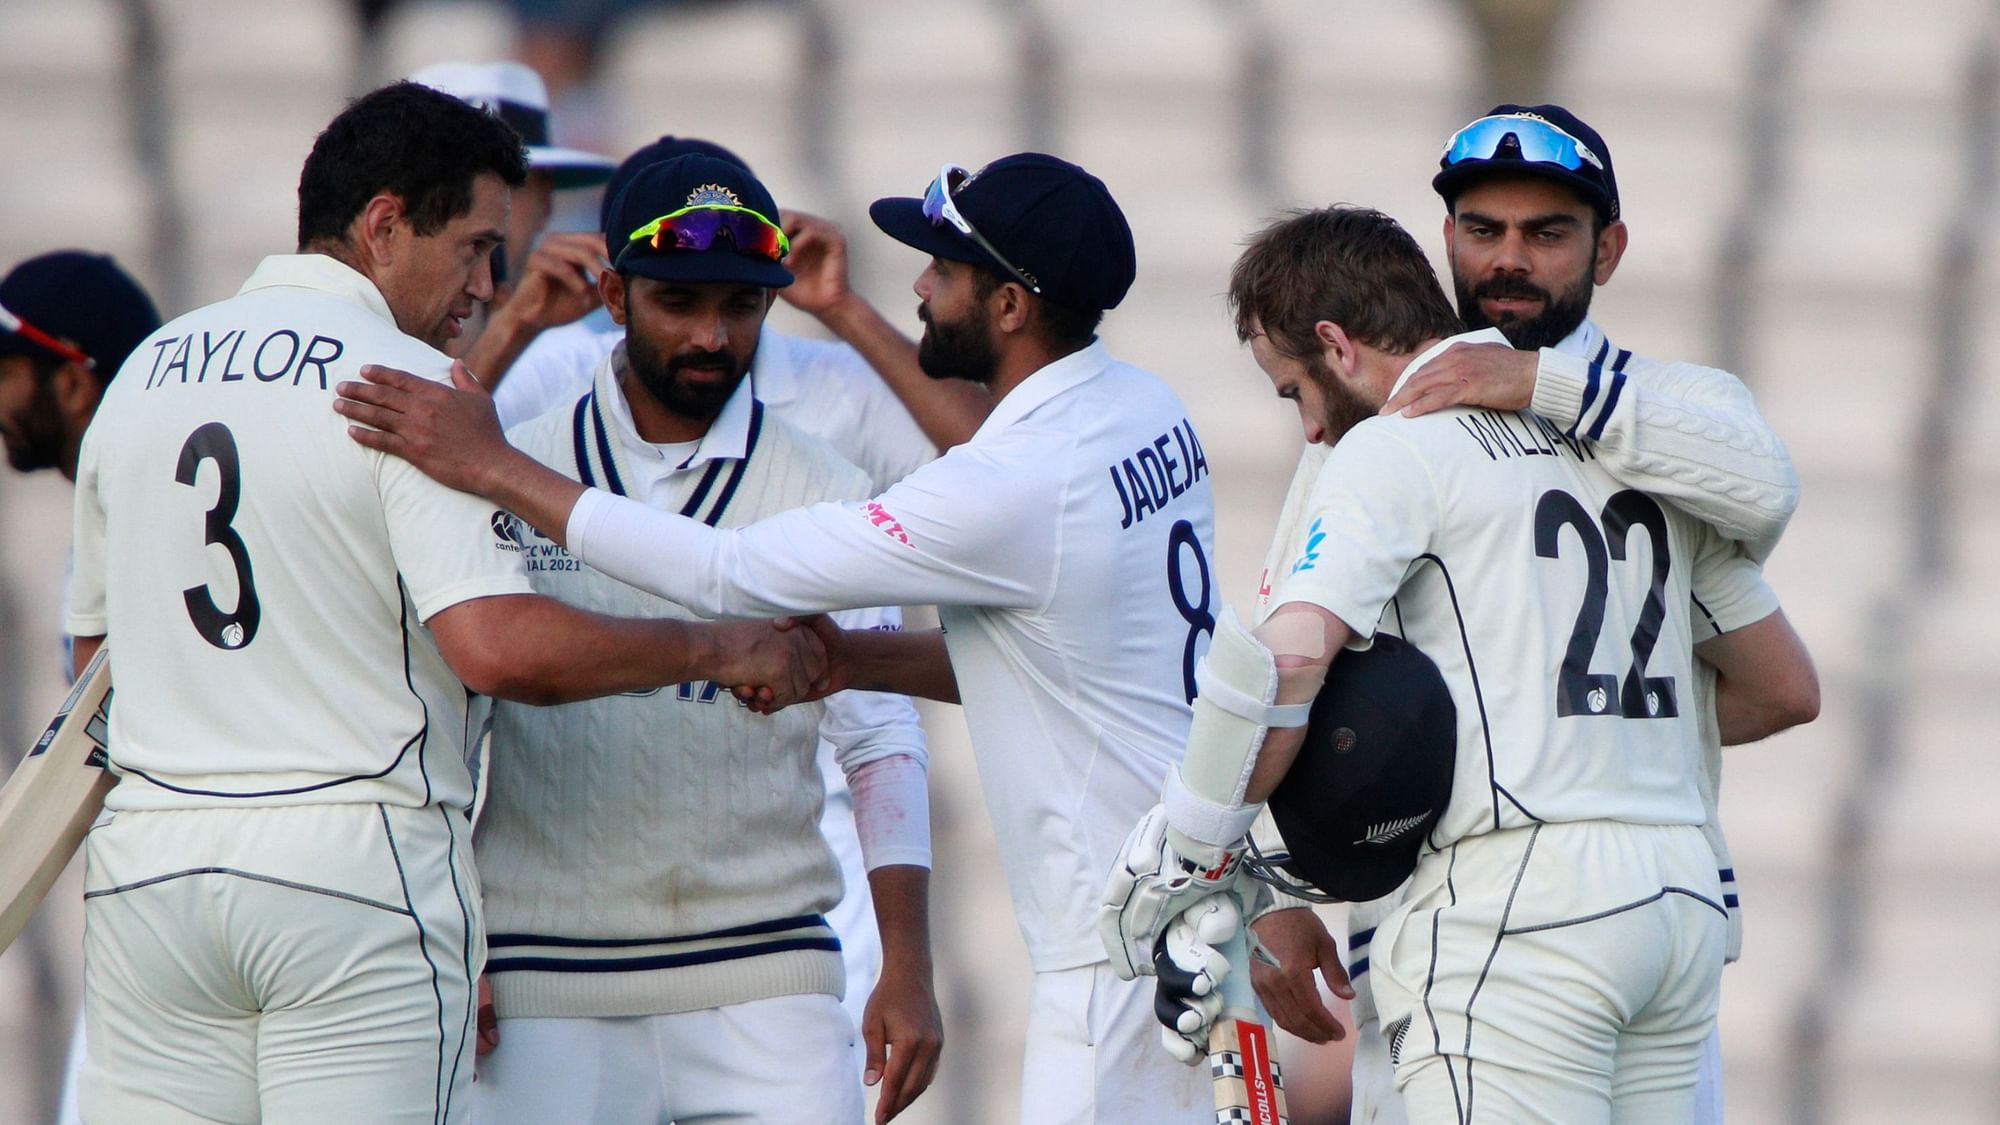 India’s captain Virat Kohli, second right, congratulates New Zealand’s Ross Taylor and captain Kane Williamson, right, on their win on the sixth day of the World Test Championship final.